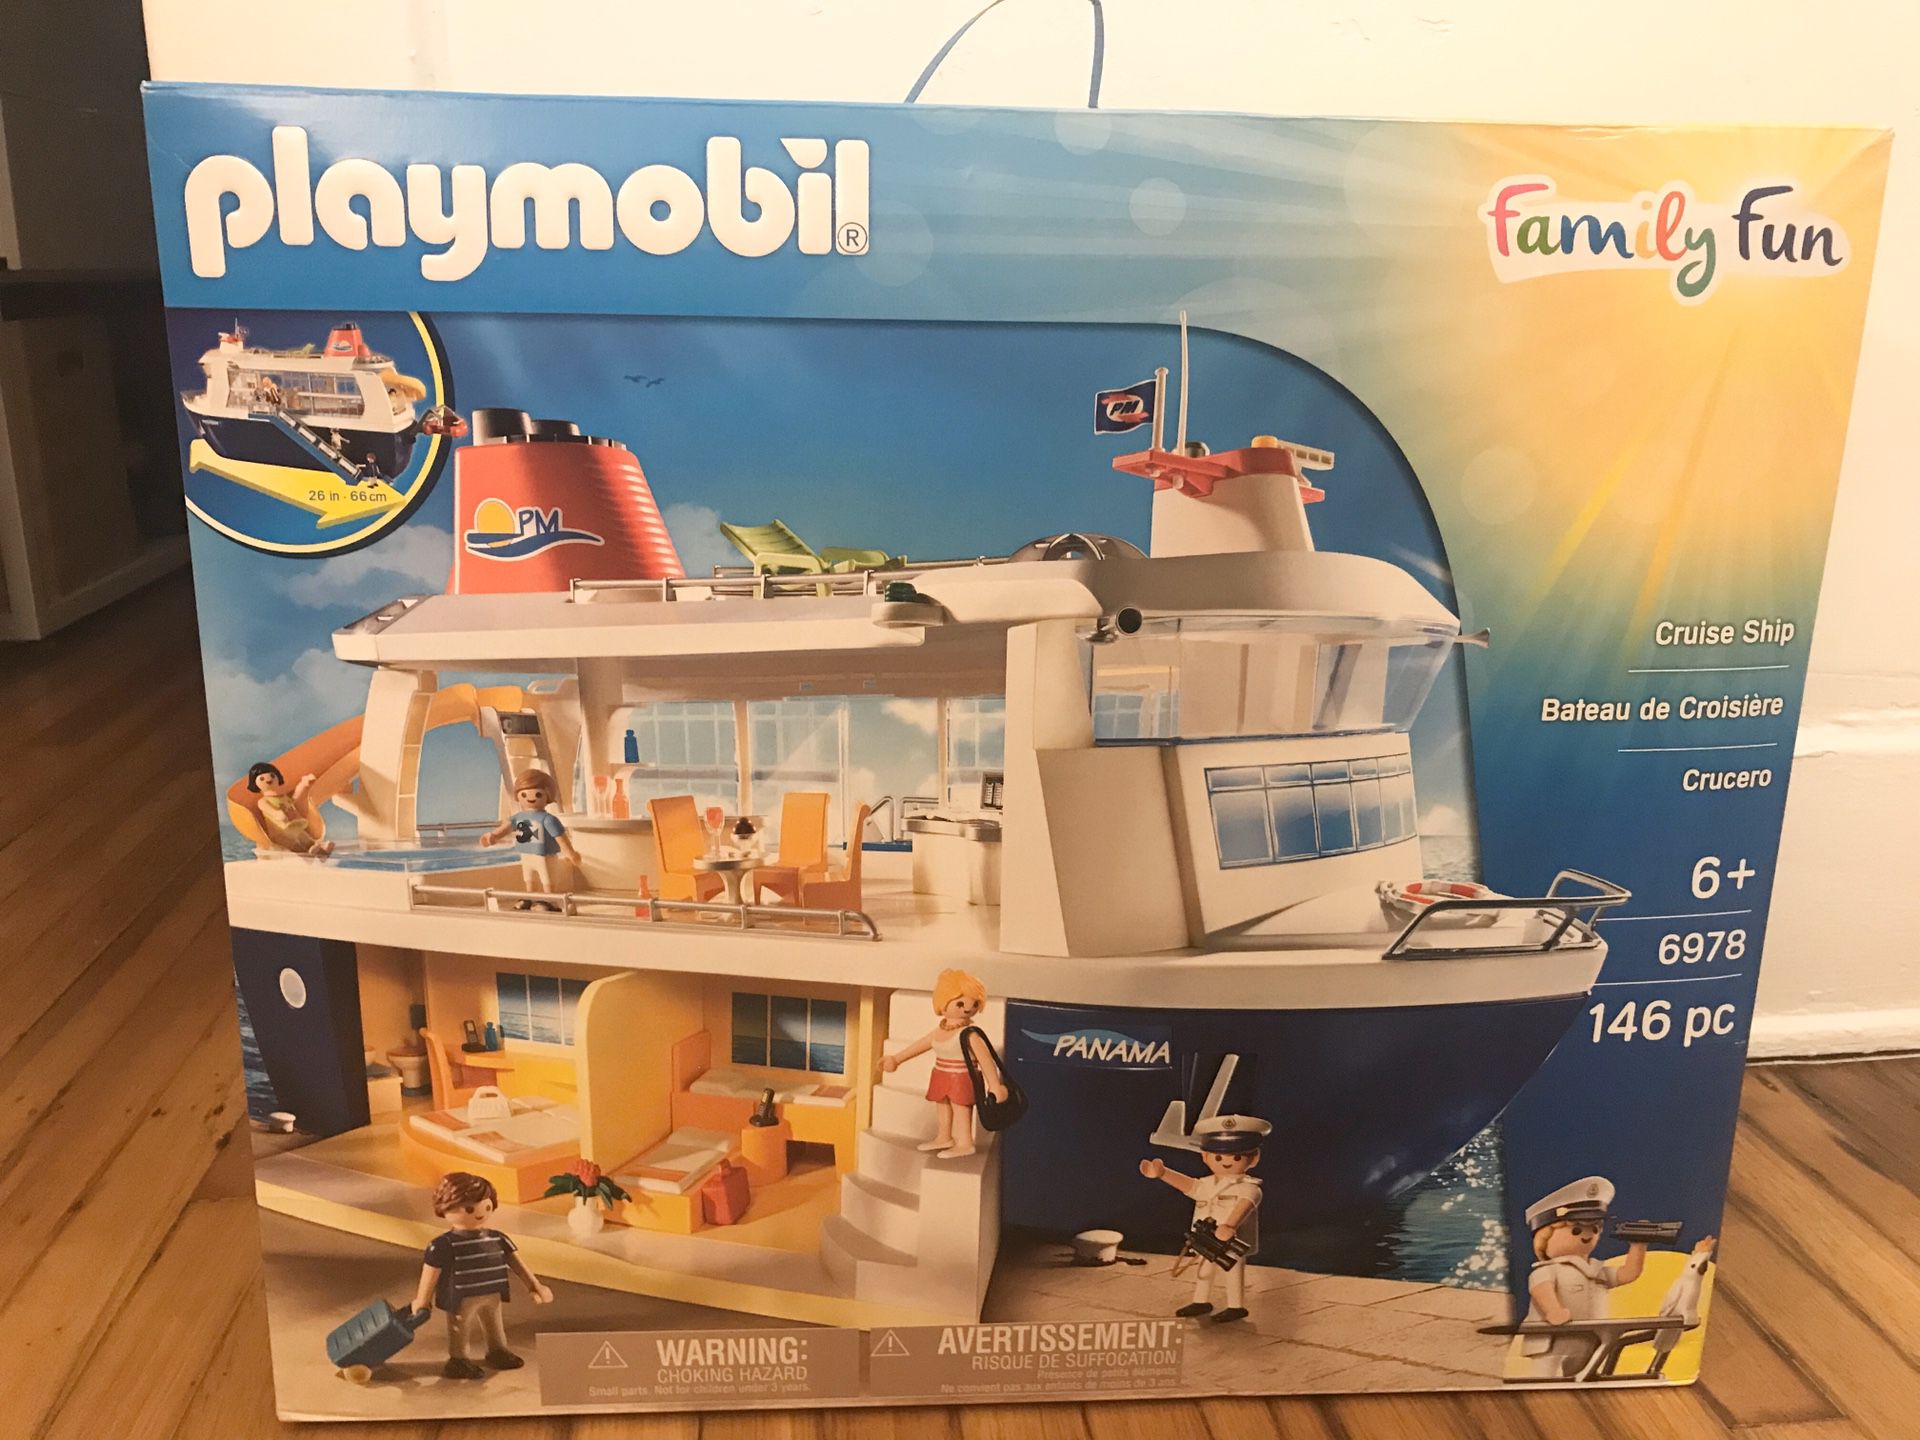 Playmobil Cruise Ship, Family fun,Toy, Unused, Never opened